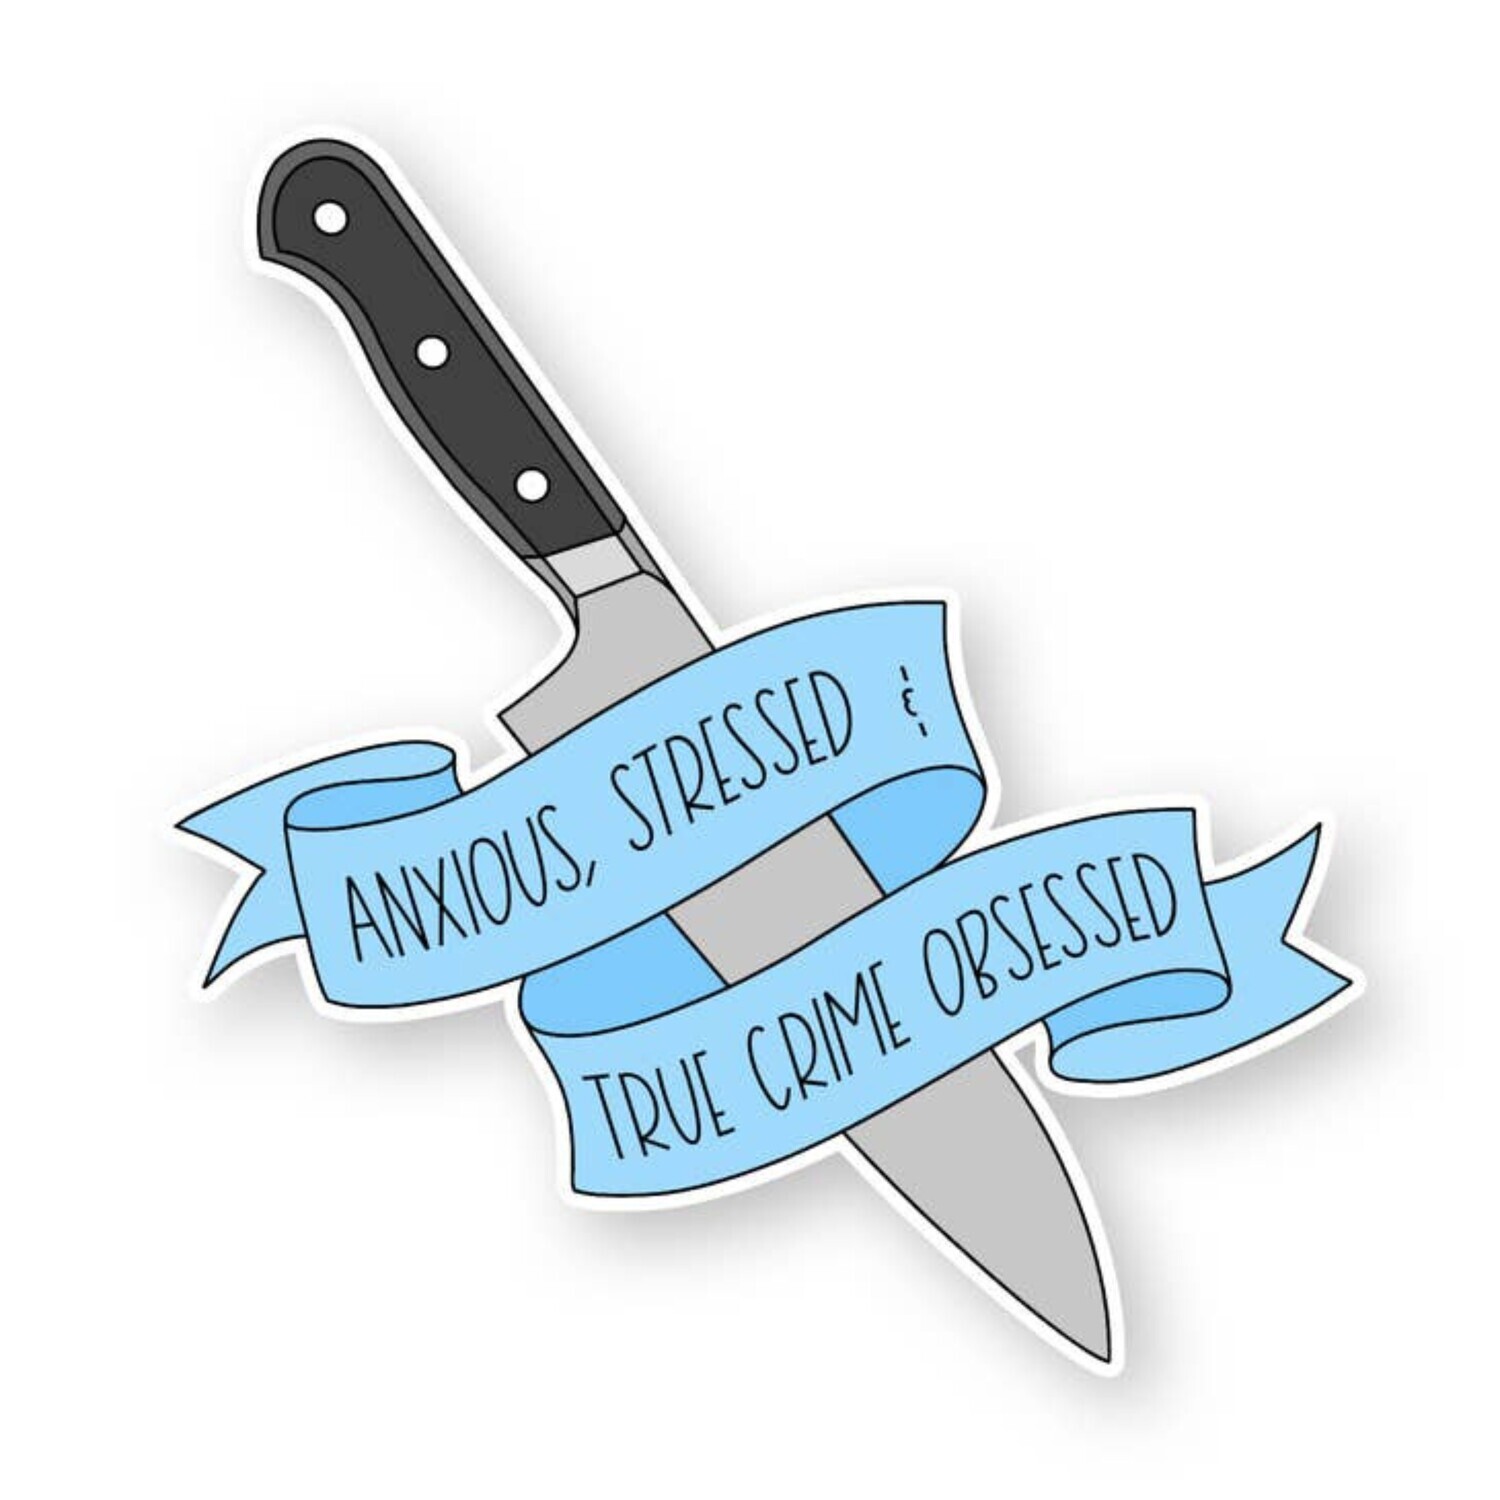 ANXIOUS STRESSED AND TRUE CRIME OBSESSED STICKER